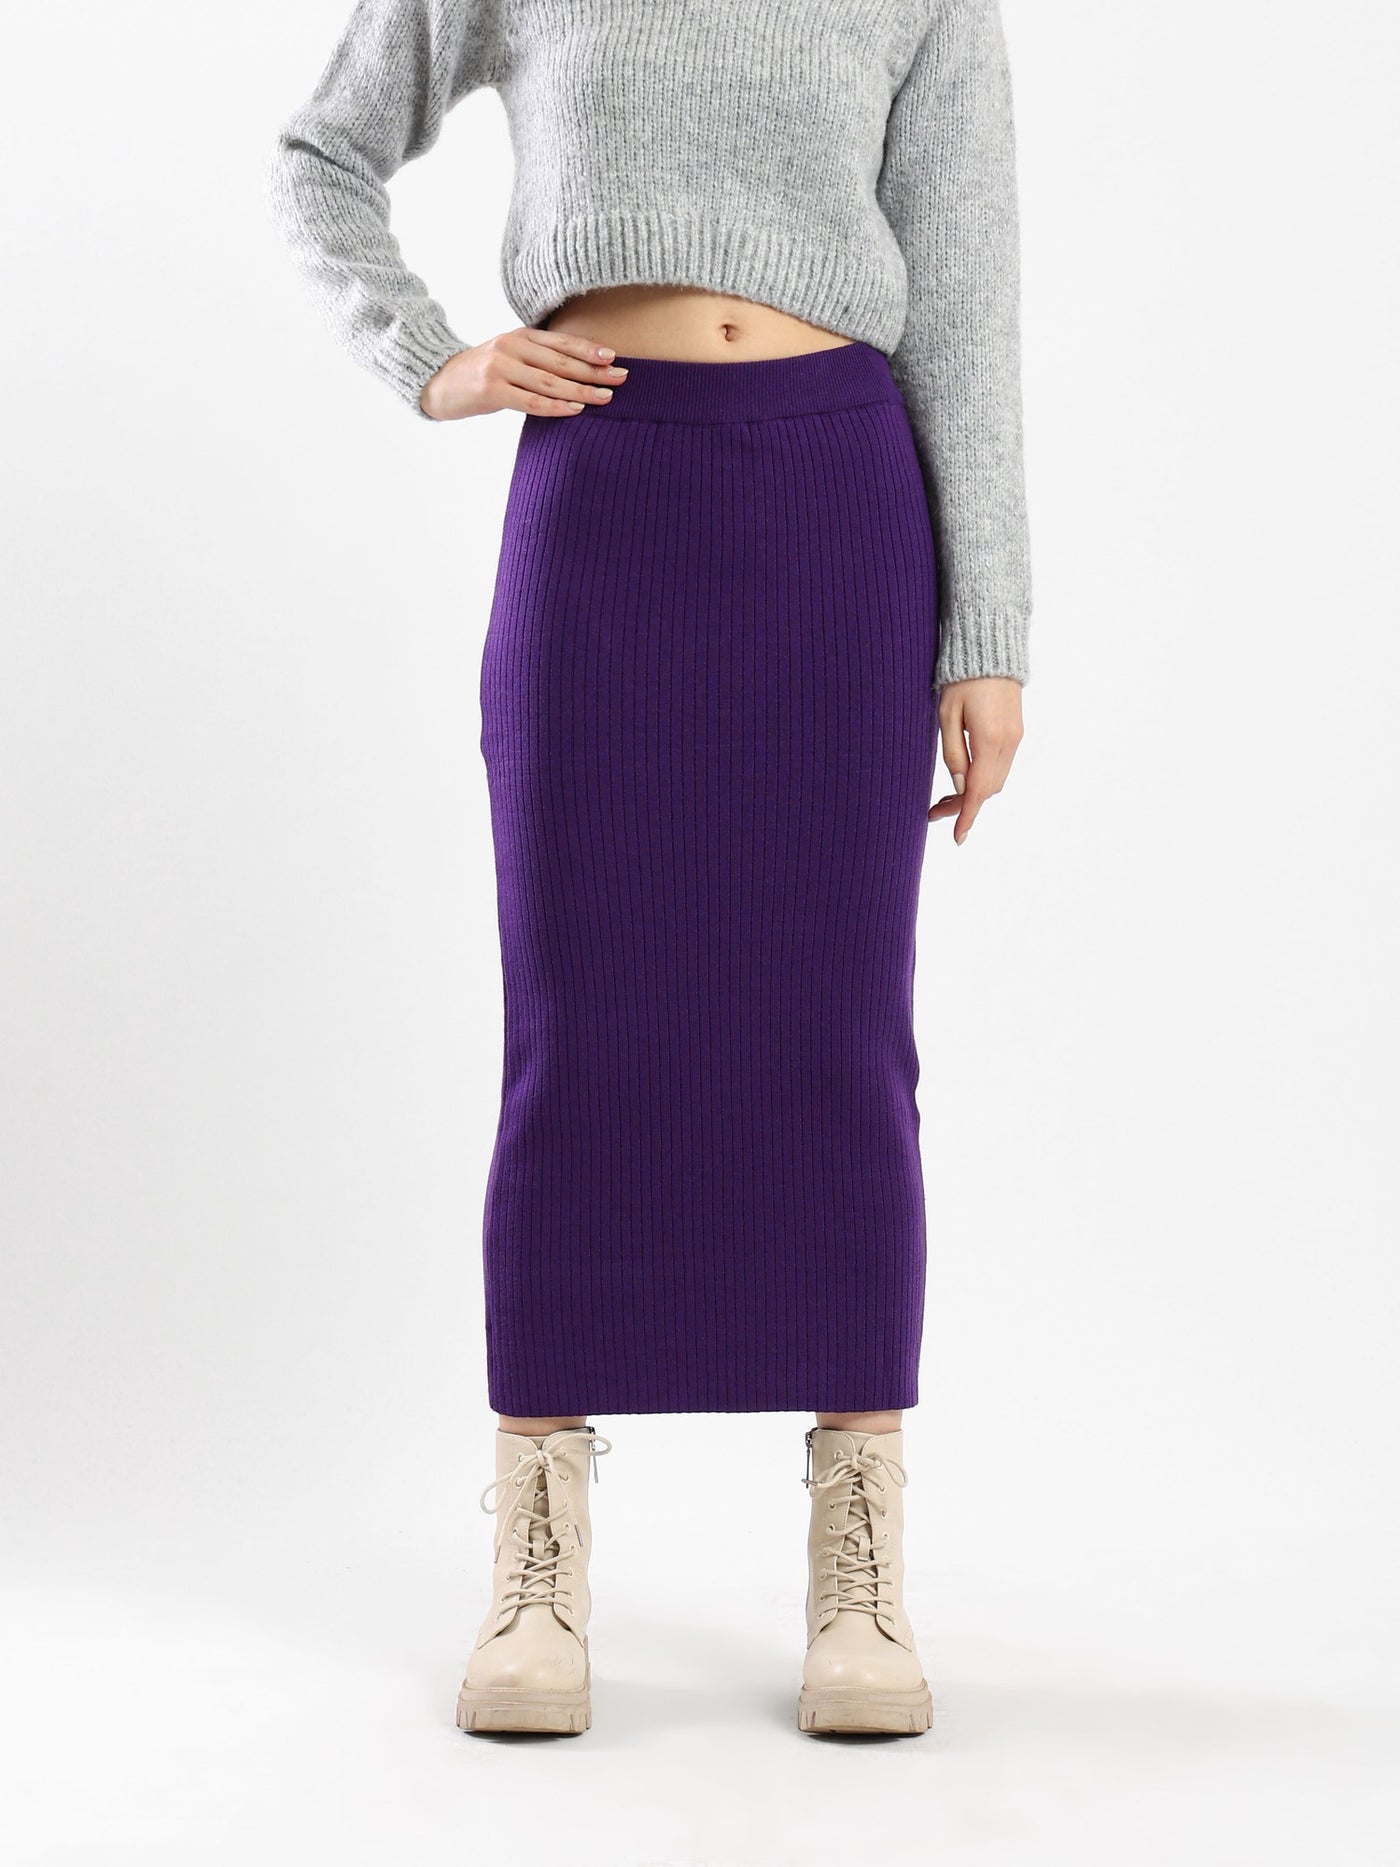 Skirt - Fitted - Ribbed Design